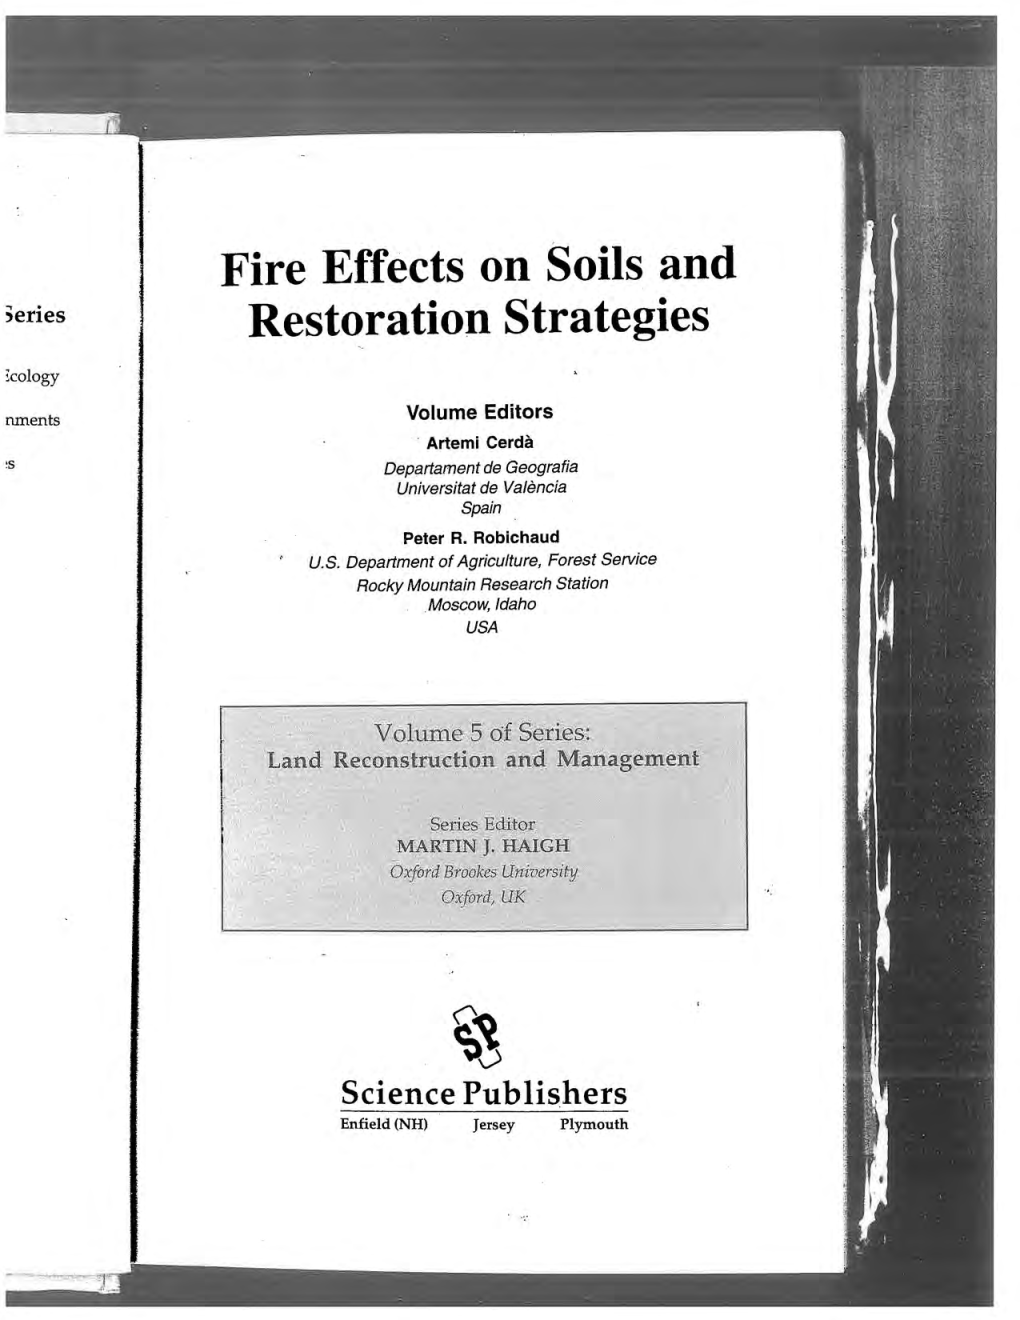 Fire Effects on Soils and Restoration Strategies Vegetation on Over 290,000 Hectares, Making It the Largest Fire Event in Californian History